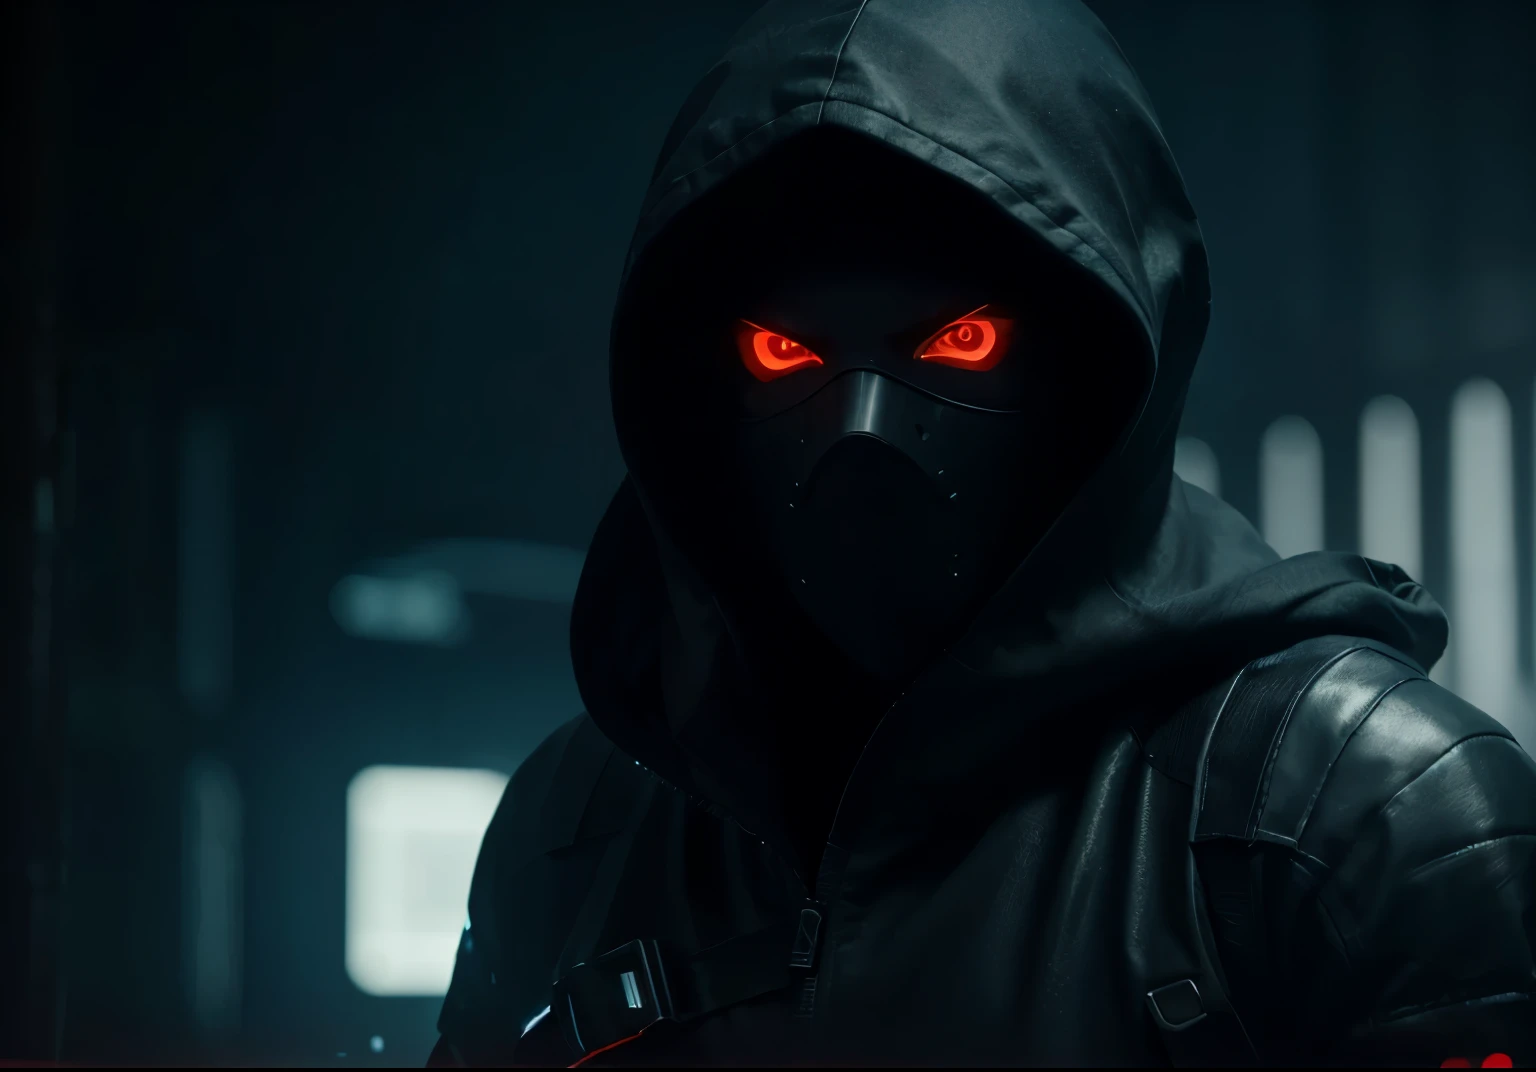 Best texture, high quality, ultra HD, 8K, ultra-detailed face, glowing eyes, realistic, very detailed, high detail, full body, cyberpunk assassin with his face visible, wearing mask covering his nose and mouth, hooded outfit, holding a dagger in both hands, dark environment with minimal lights, depth of field, cinematic scene, dramatic lighting